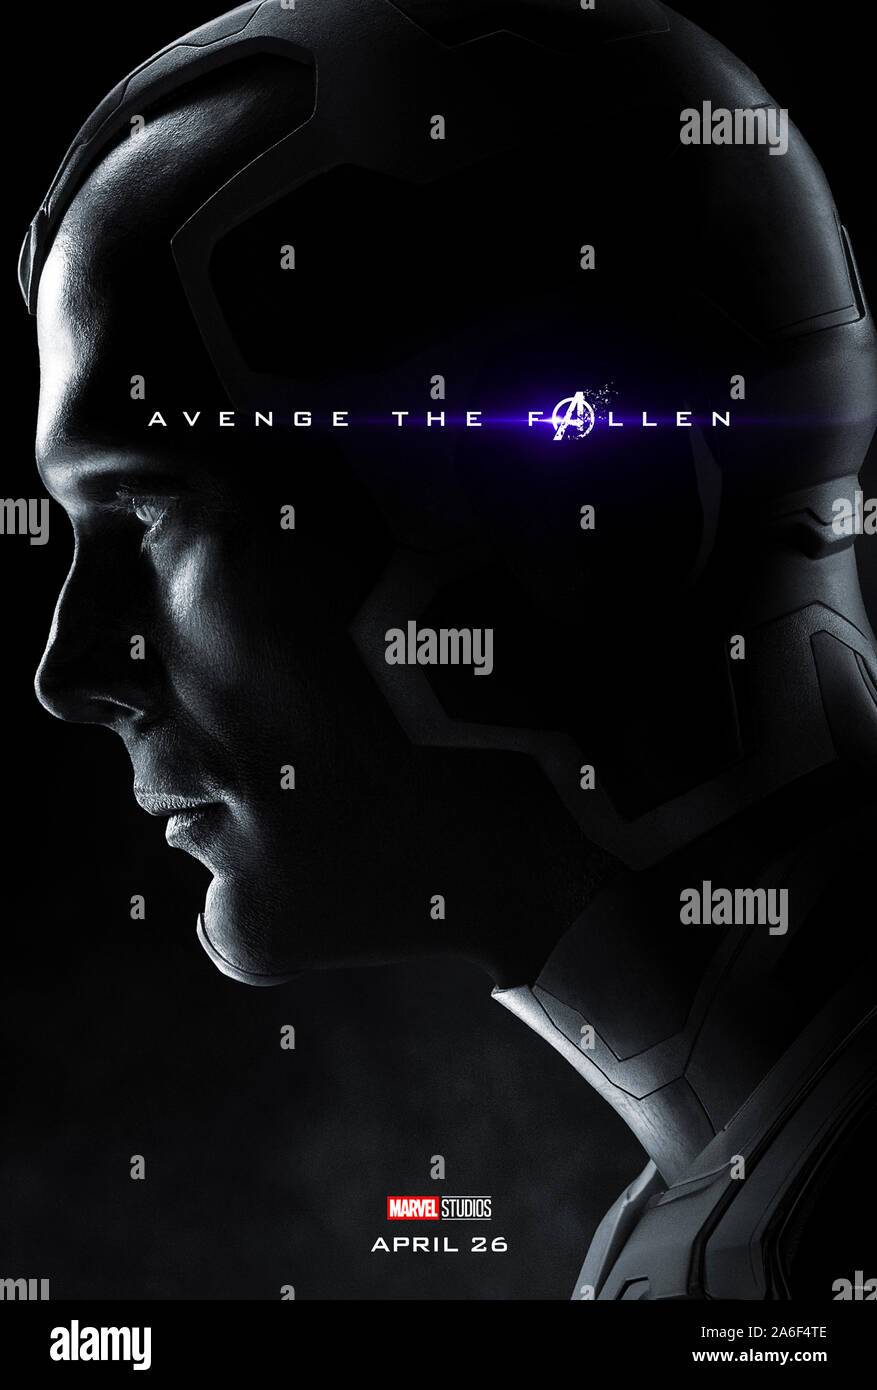 Character advance poster for Avengers: Endgame (2019) directed  by Anthony and Joe Russo featuring Paul Bettany as Vision. The epic conclusion and 22nd film in the Marvel Cinematic Universe. Stock Photo